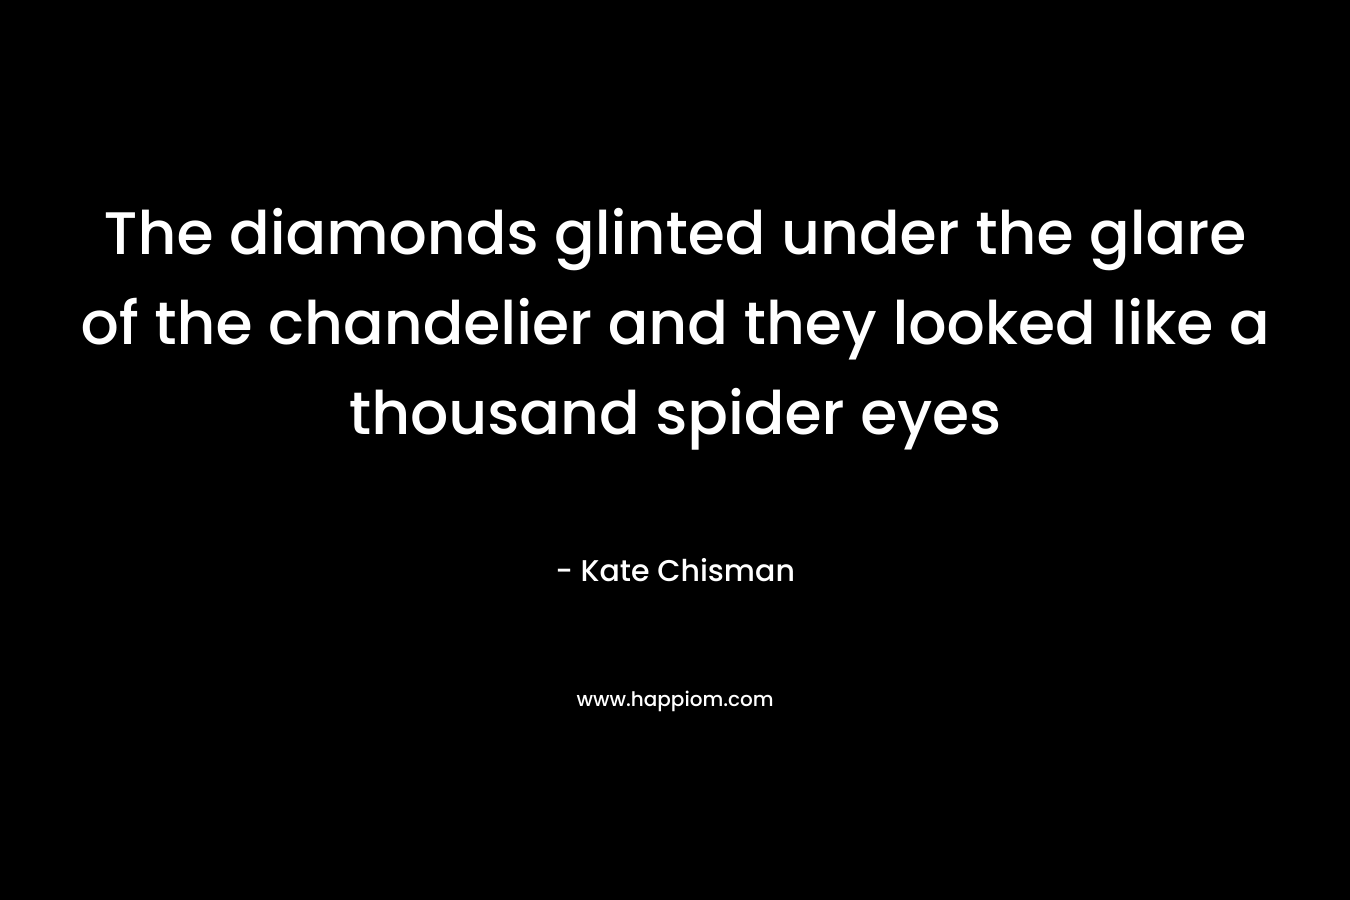 The diamonds glinted under the glare of the chandelier and they looked like a thousand spider eyes – Kate Chisman